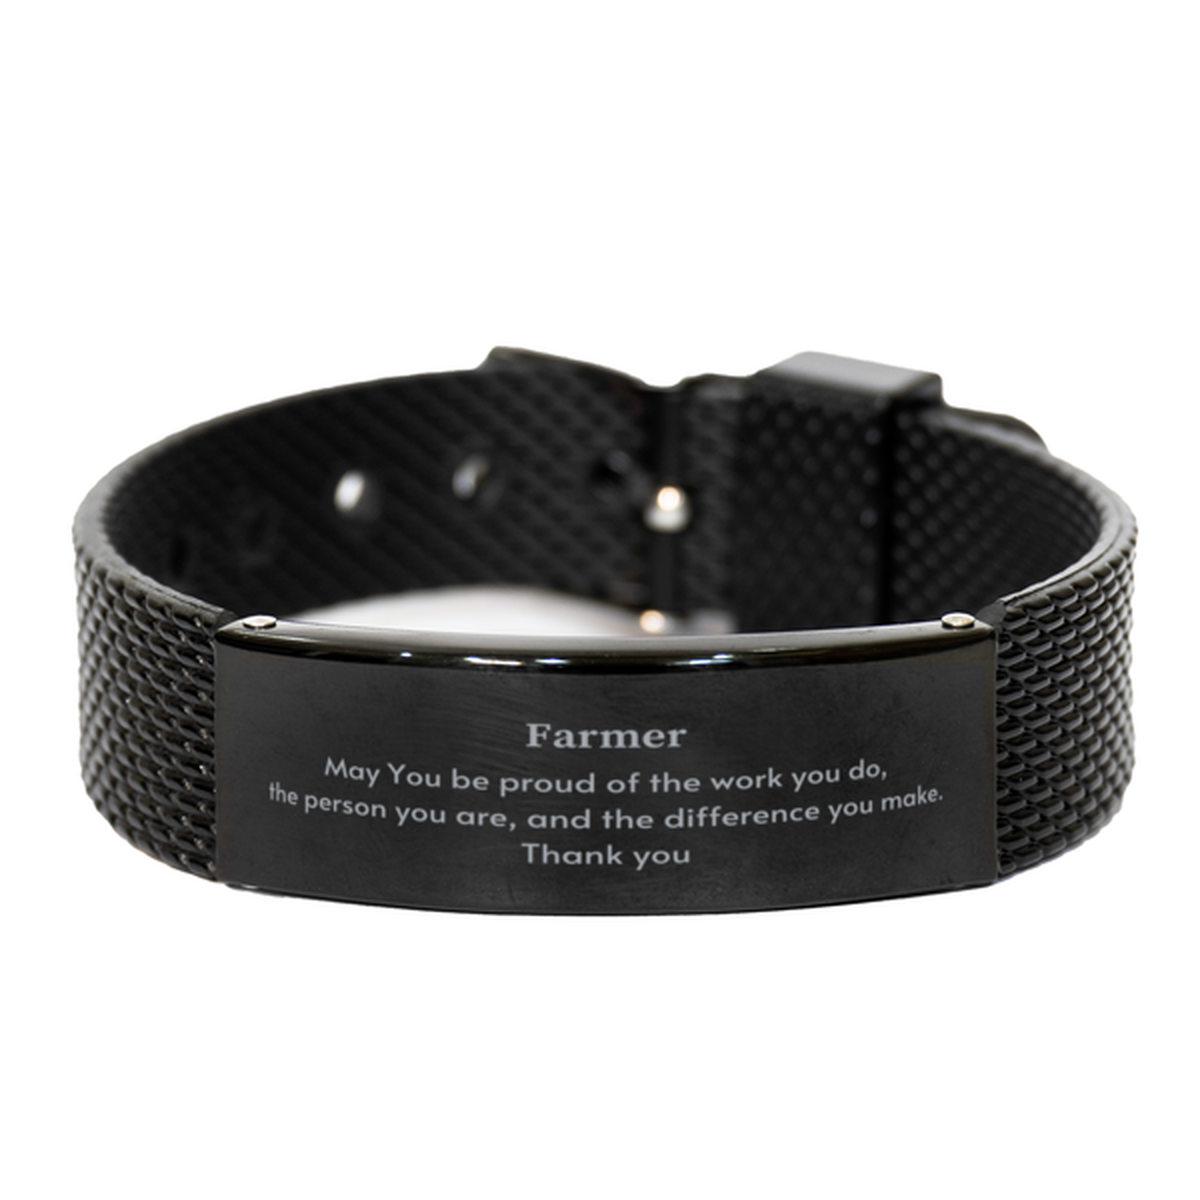 Heartwarming Black Shark Mesh Bracelet Retirement Coworkers Gifts for Farmer, Farmer May You be proud of the work you do, the person you are Gifts for Boss Men Women Friends